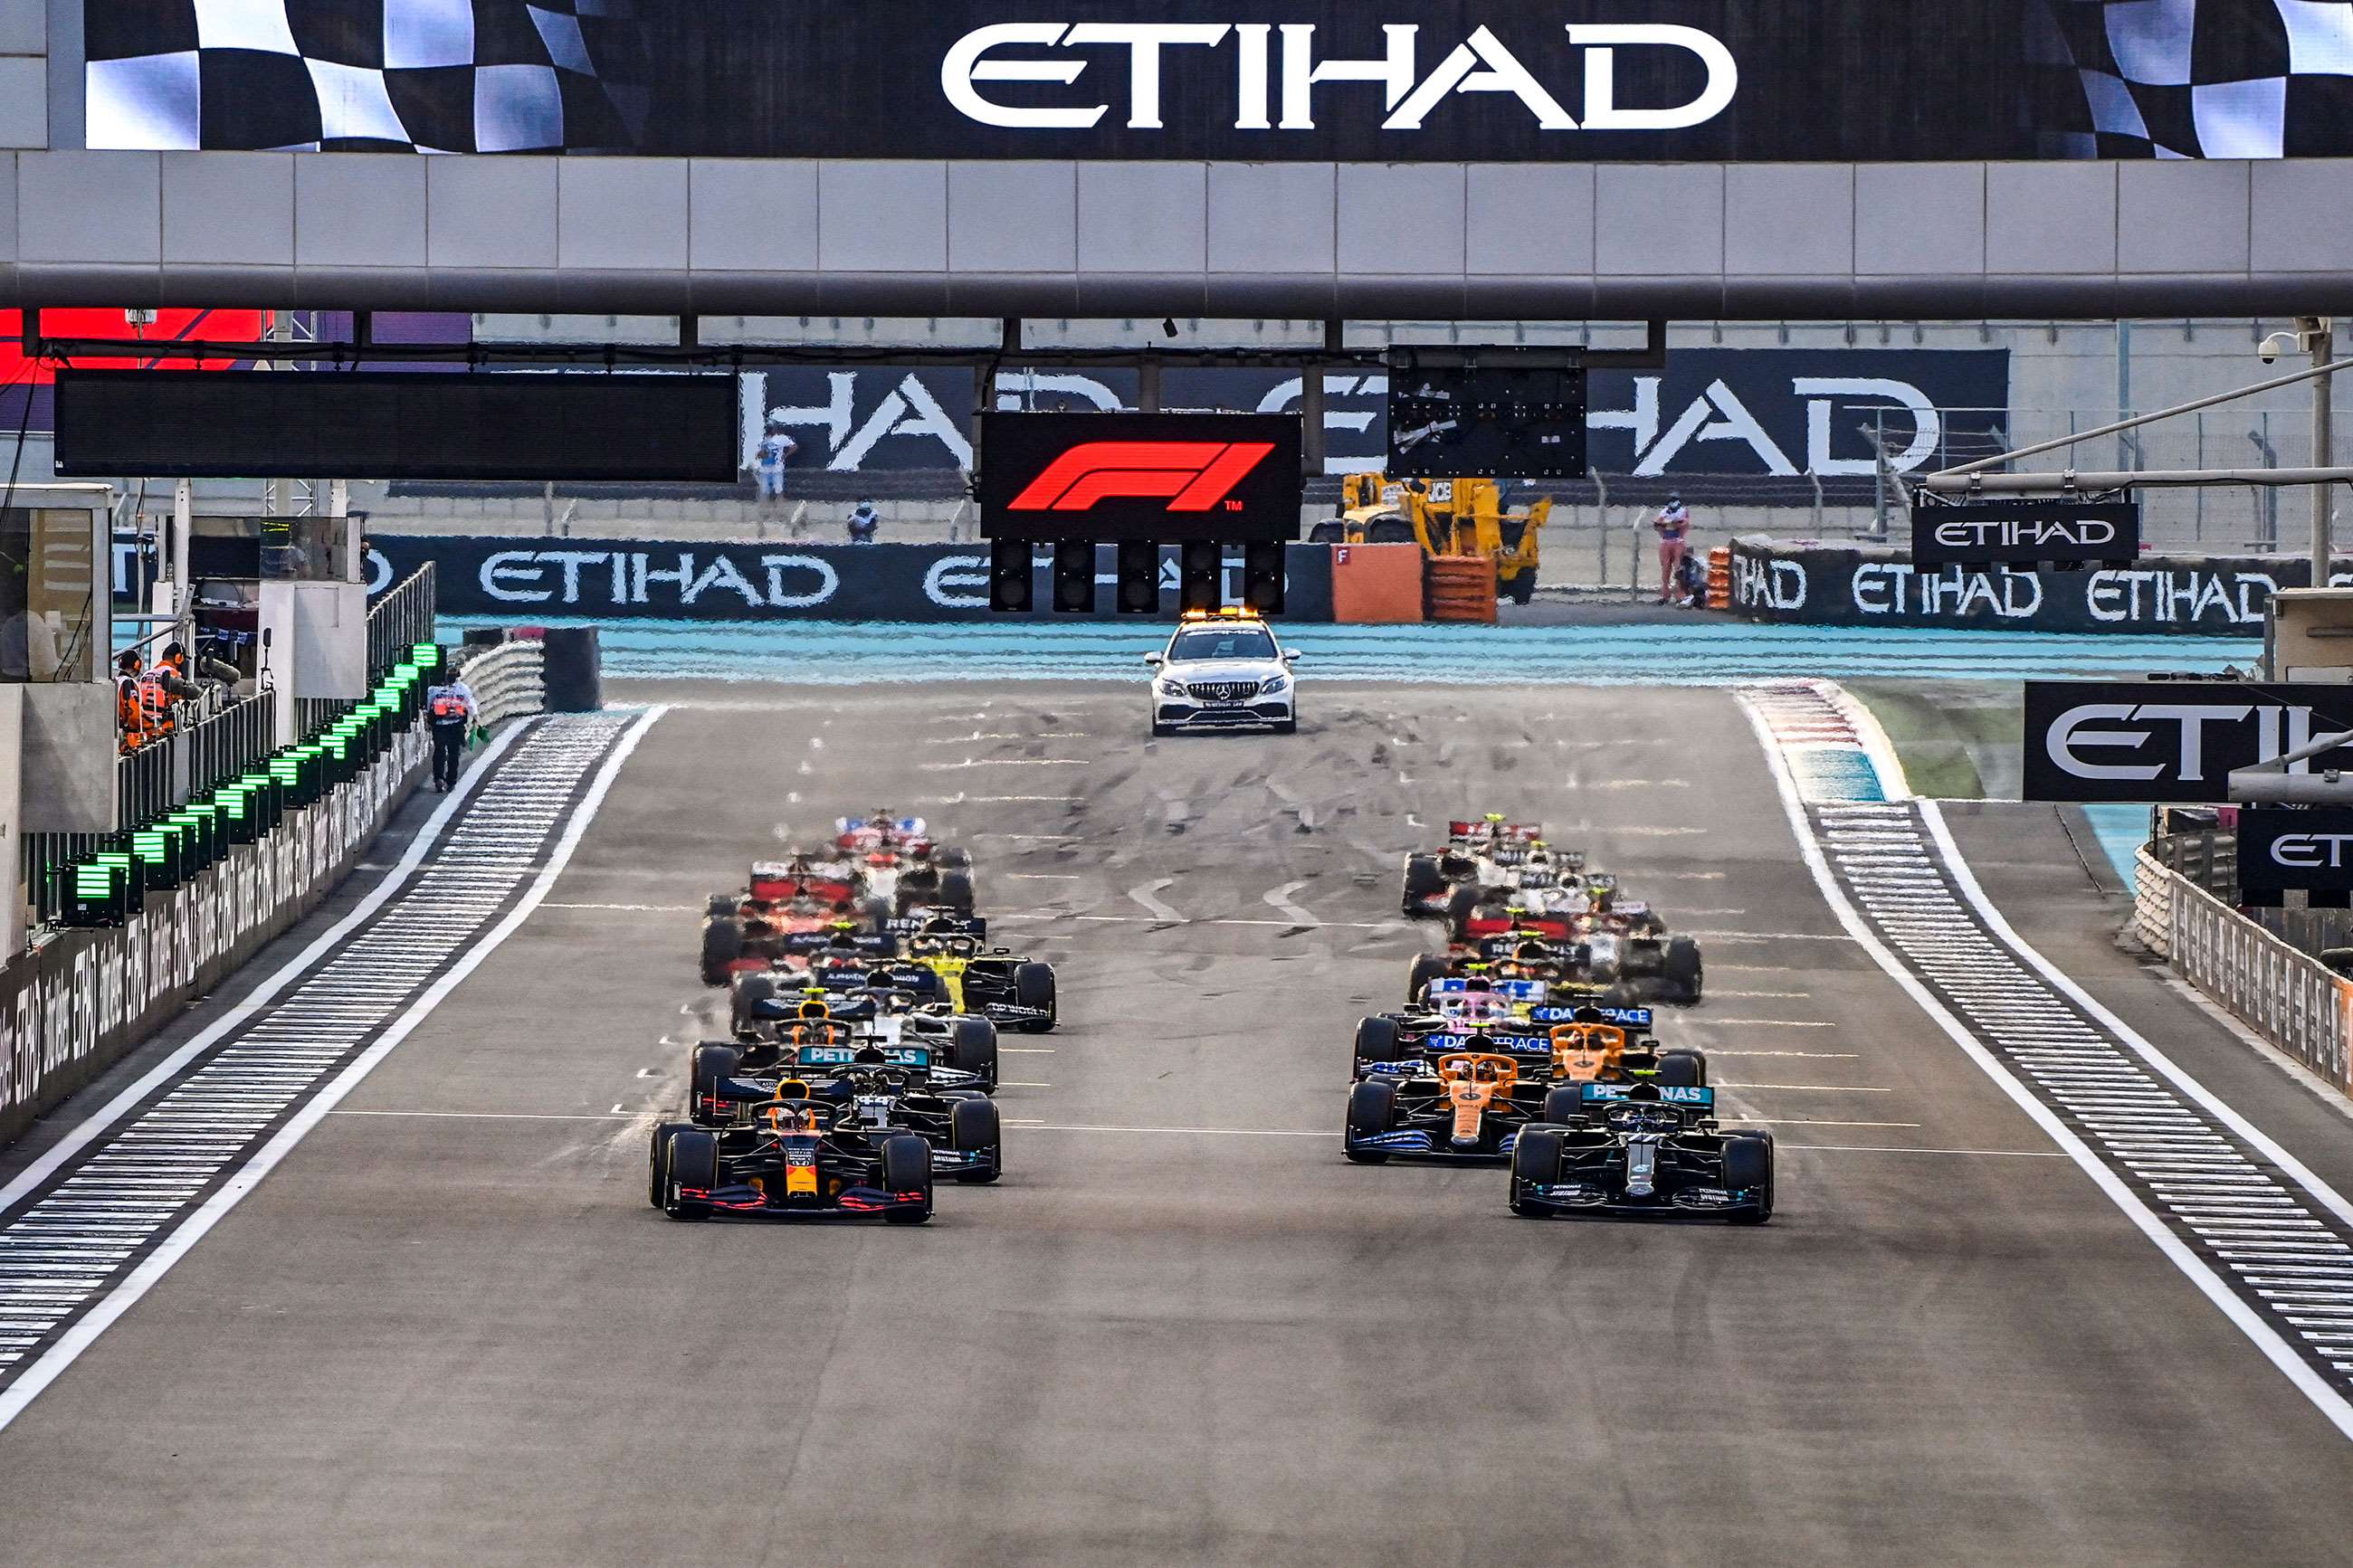 Where to watch the 2021 F1 finale GRR